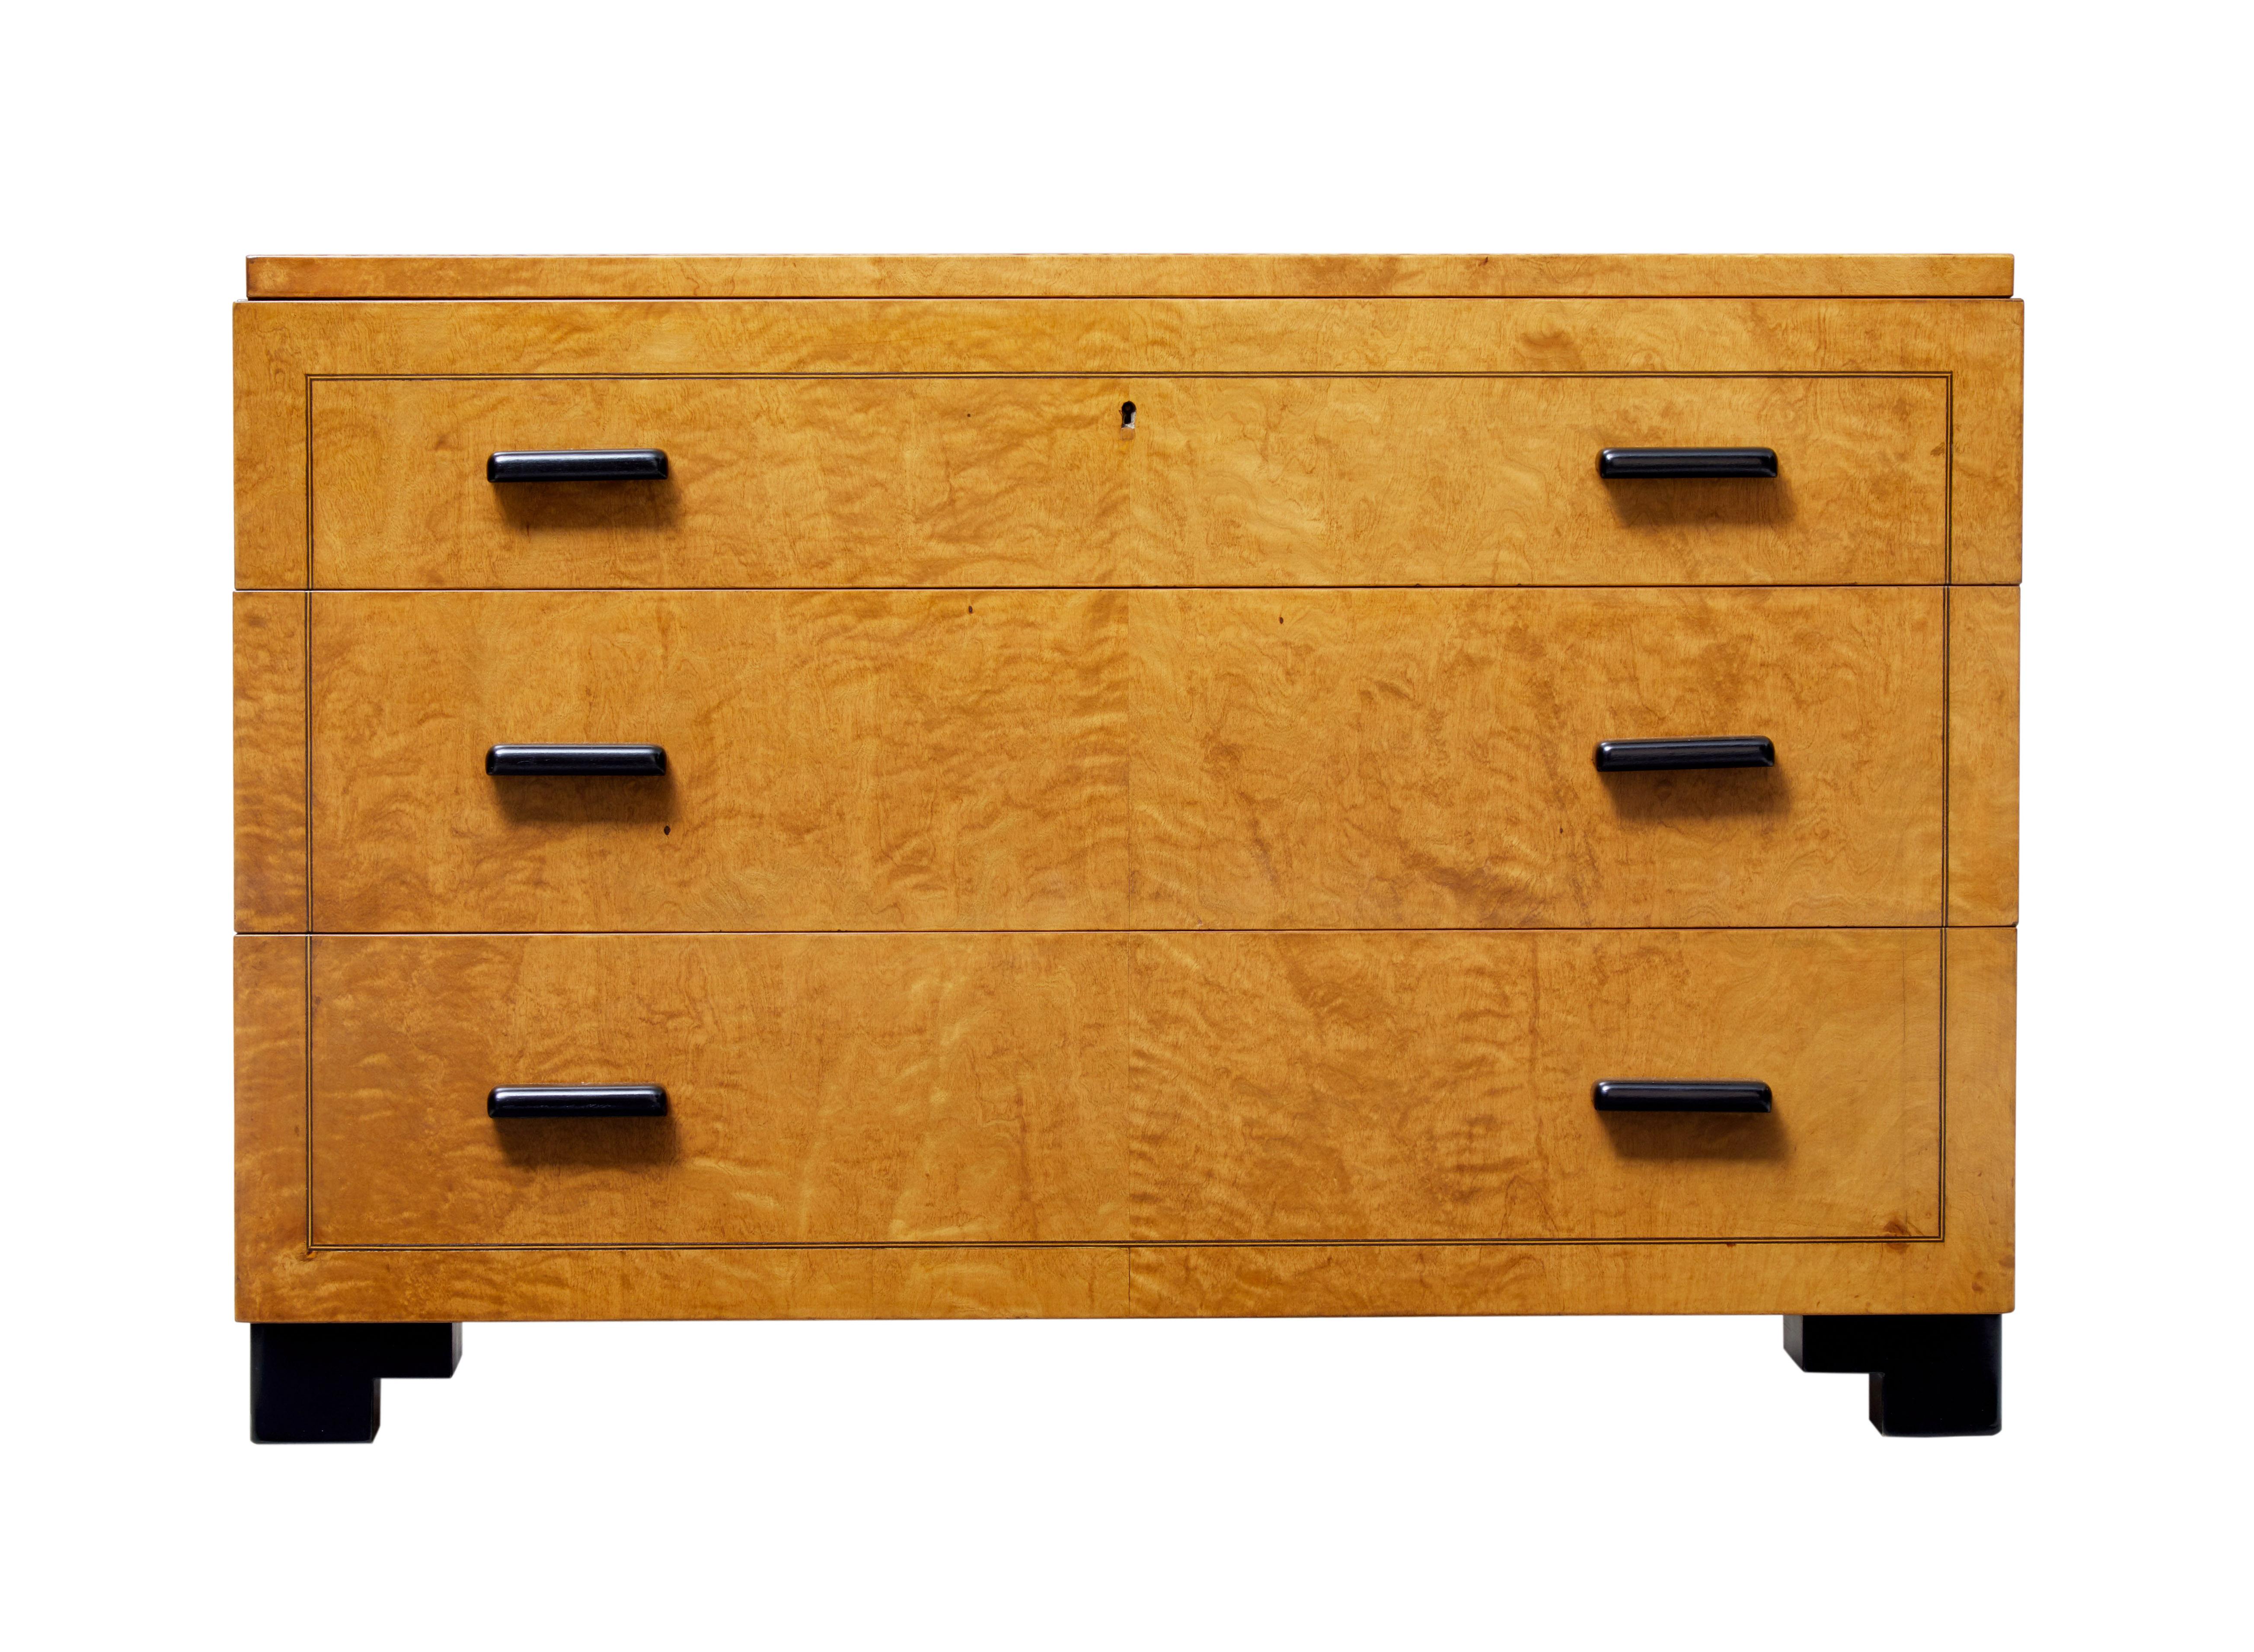 Good quality Art Deco chest of drawers, circa 1930.

3 graduating drawers with ebony stringing and ebonized wooden handles.

Burr birch veneers used to full effect on this fine chest of drawers. Standing on shaped ebonized feet.

Minor